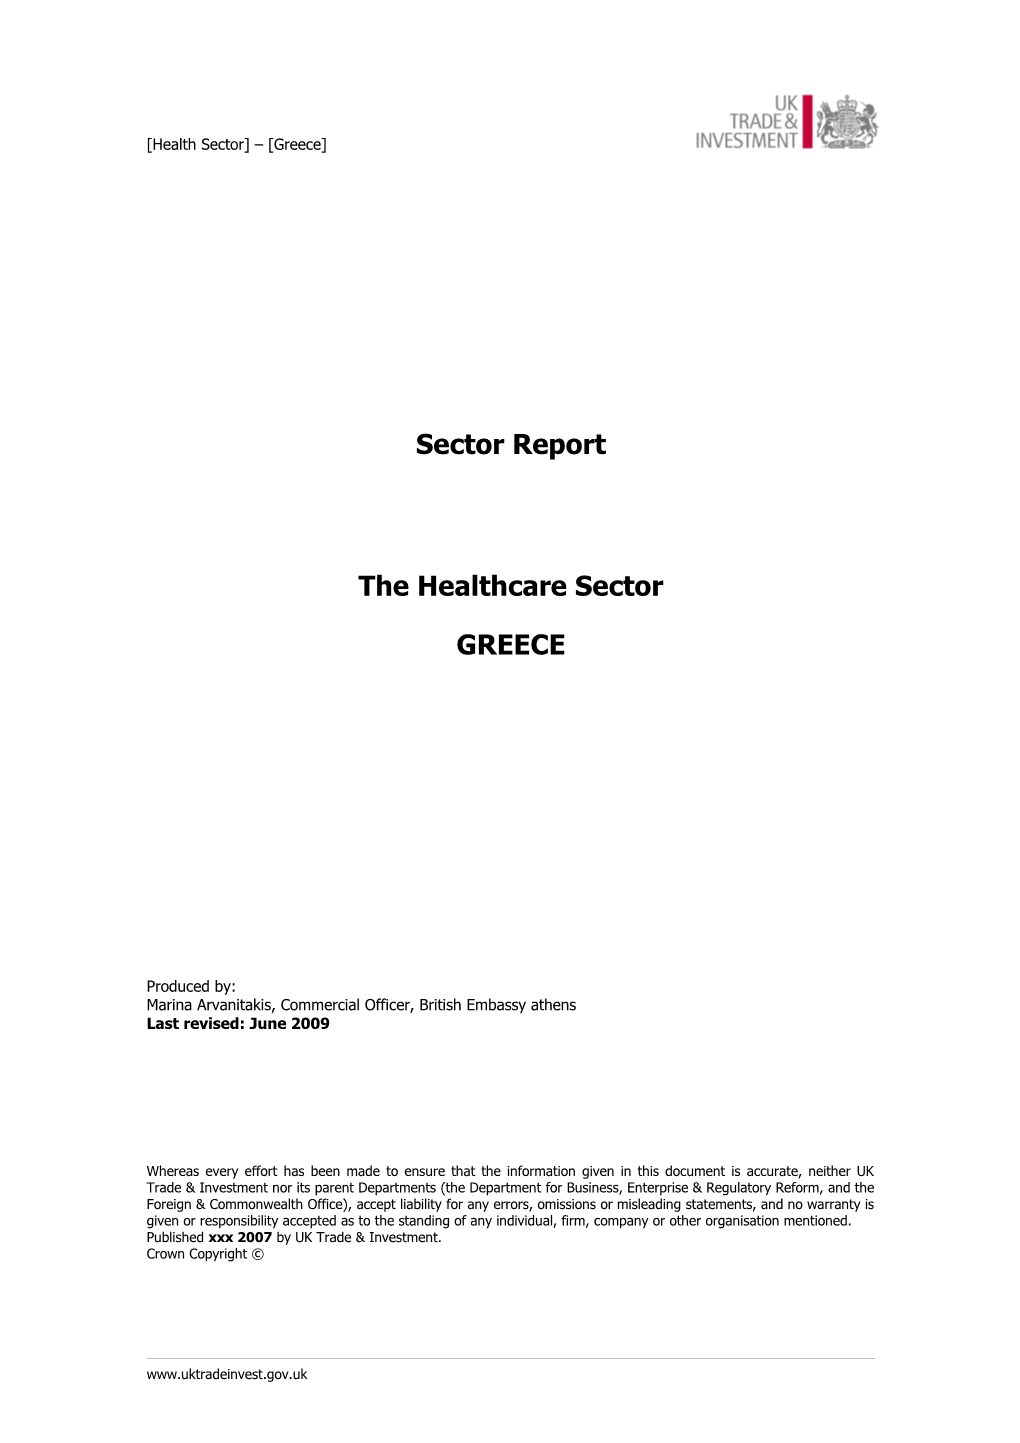 Health Sector Report Template